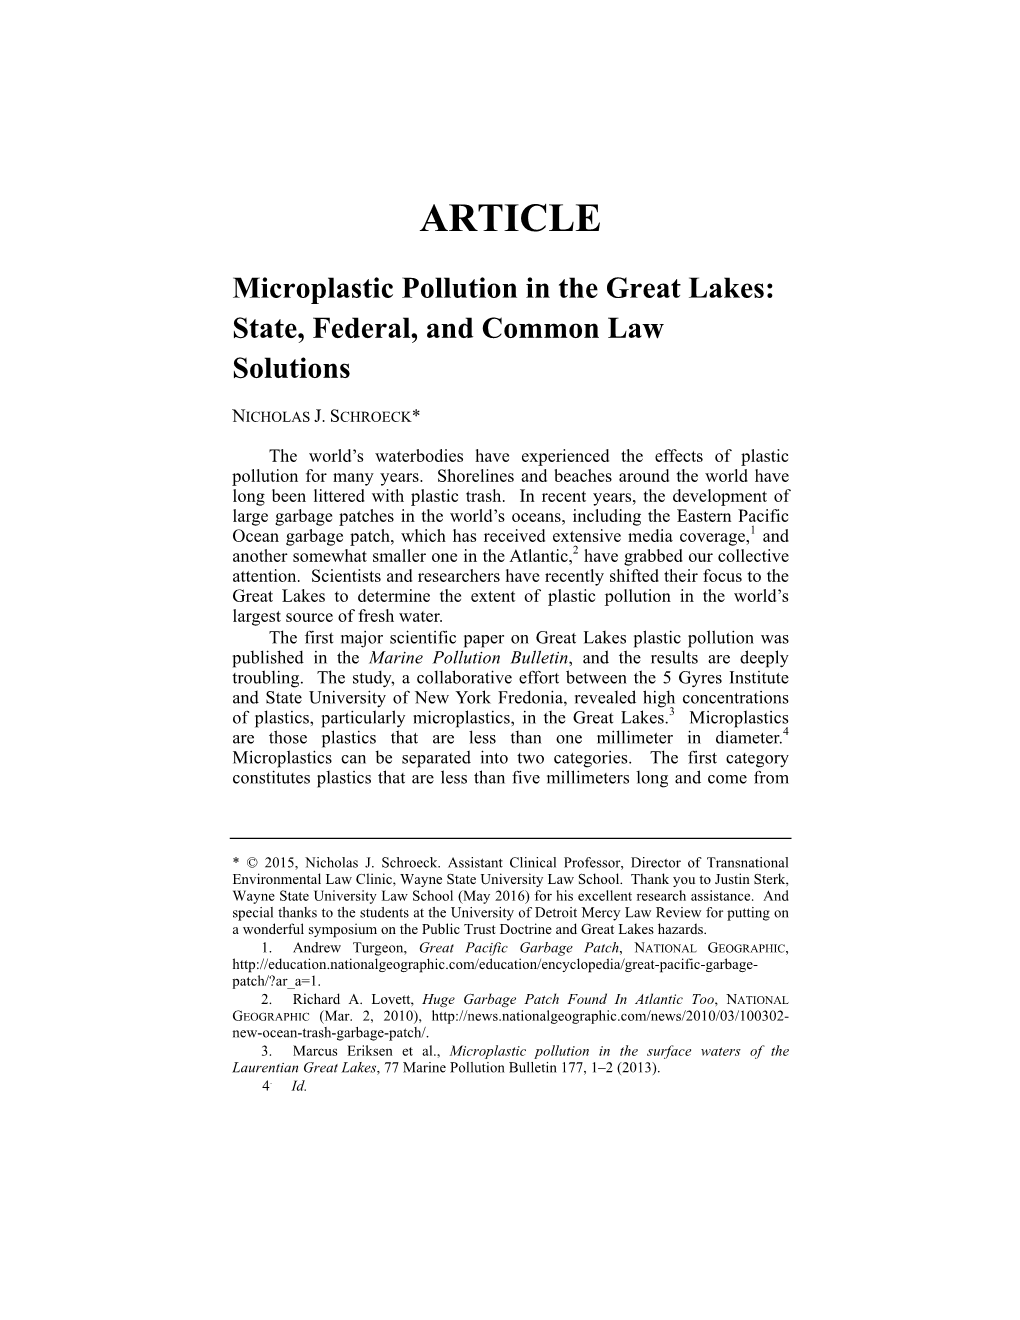 Microplastic Pollution in the Great Lakes: State, Federal, and Common Law Solutions